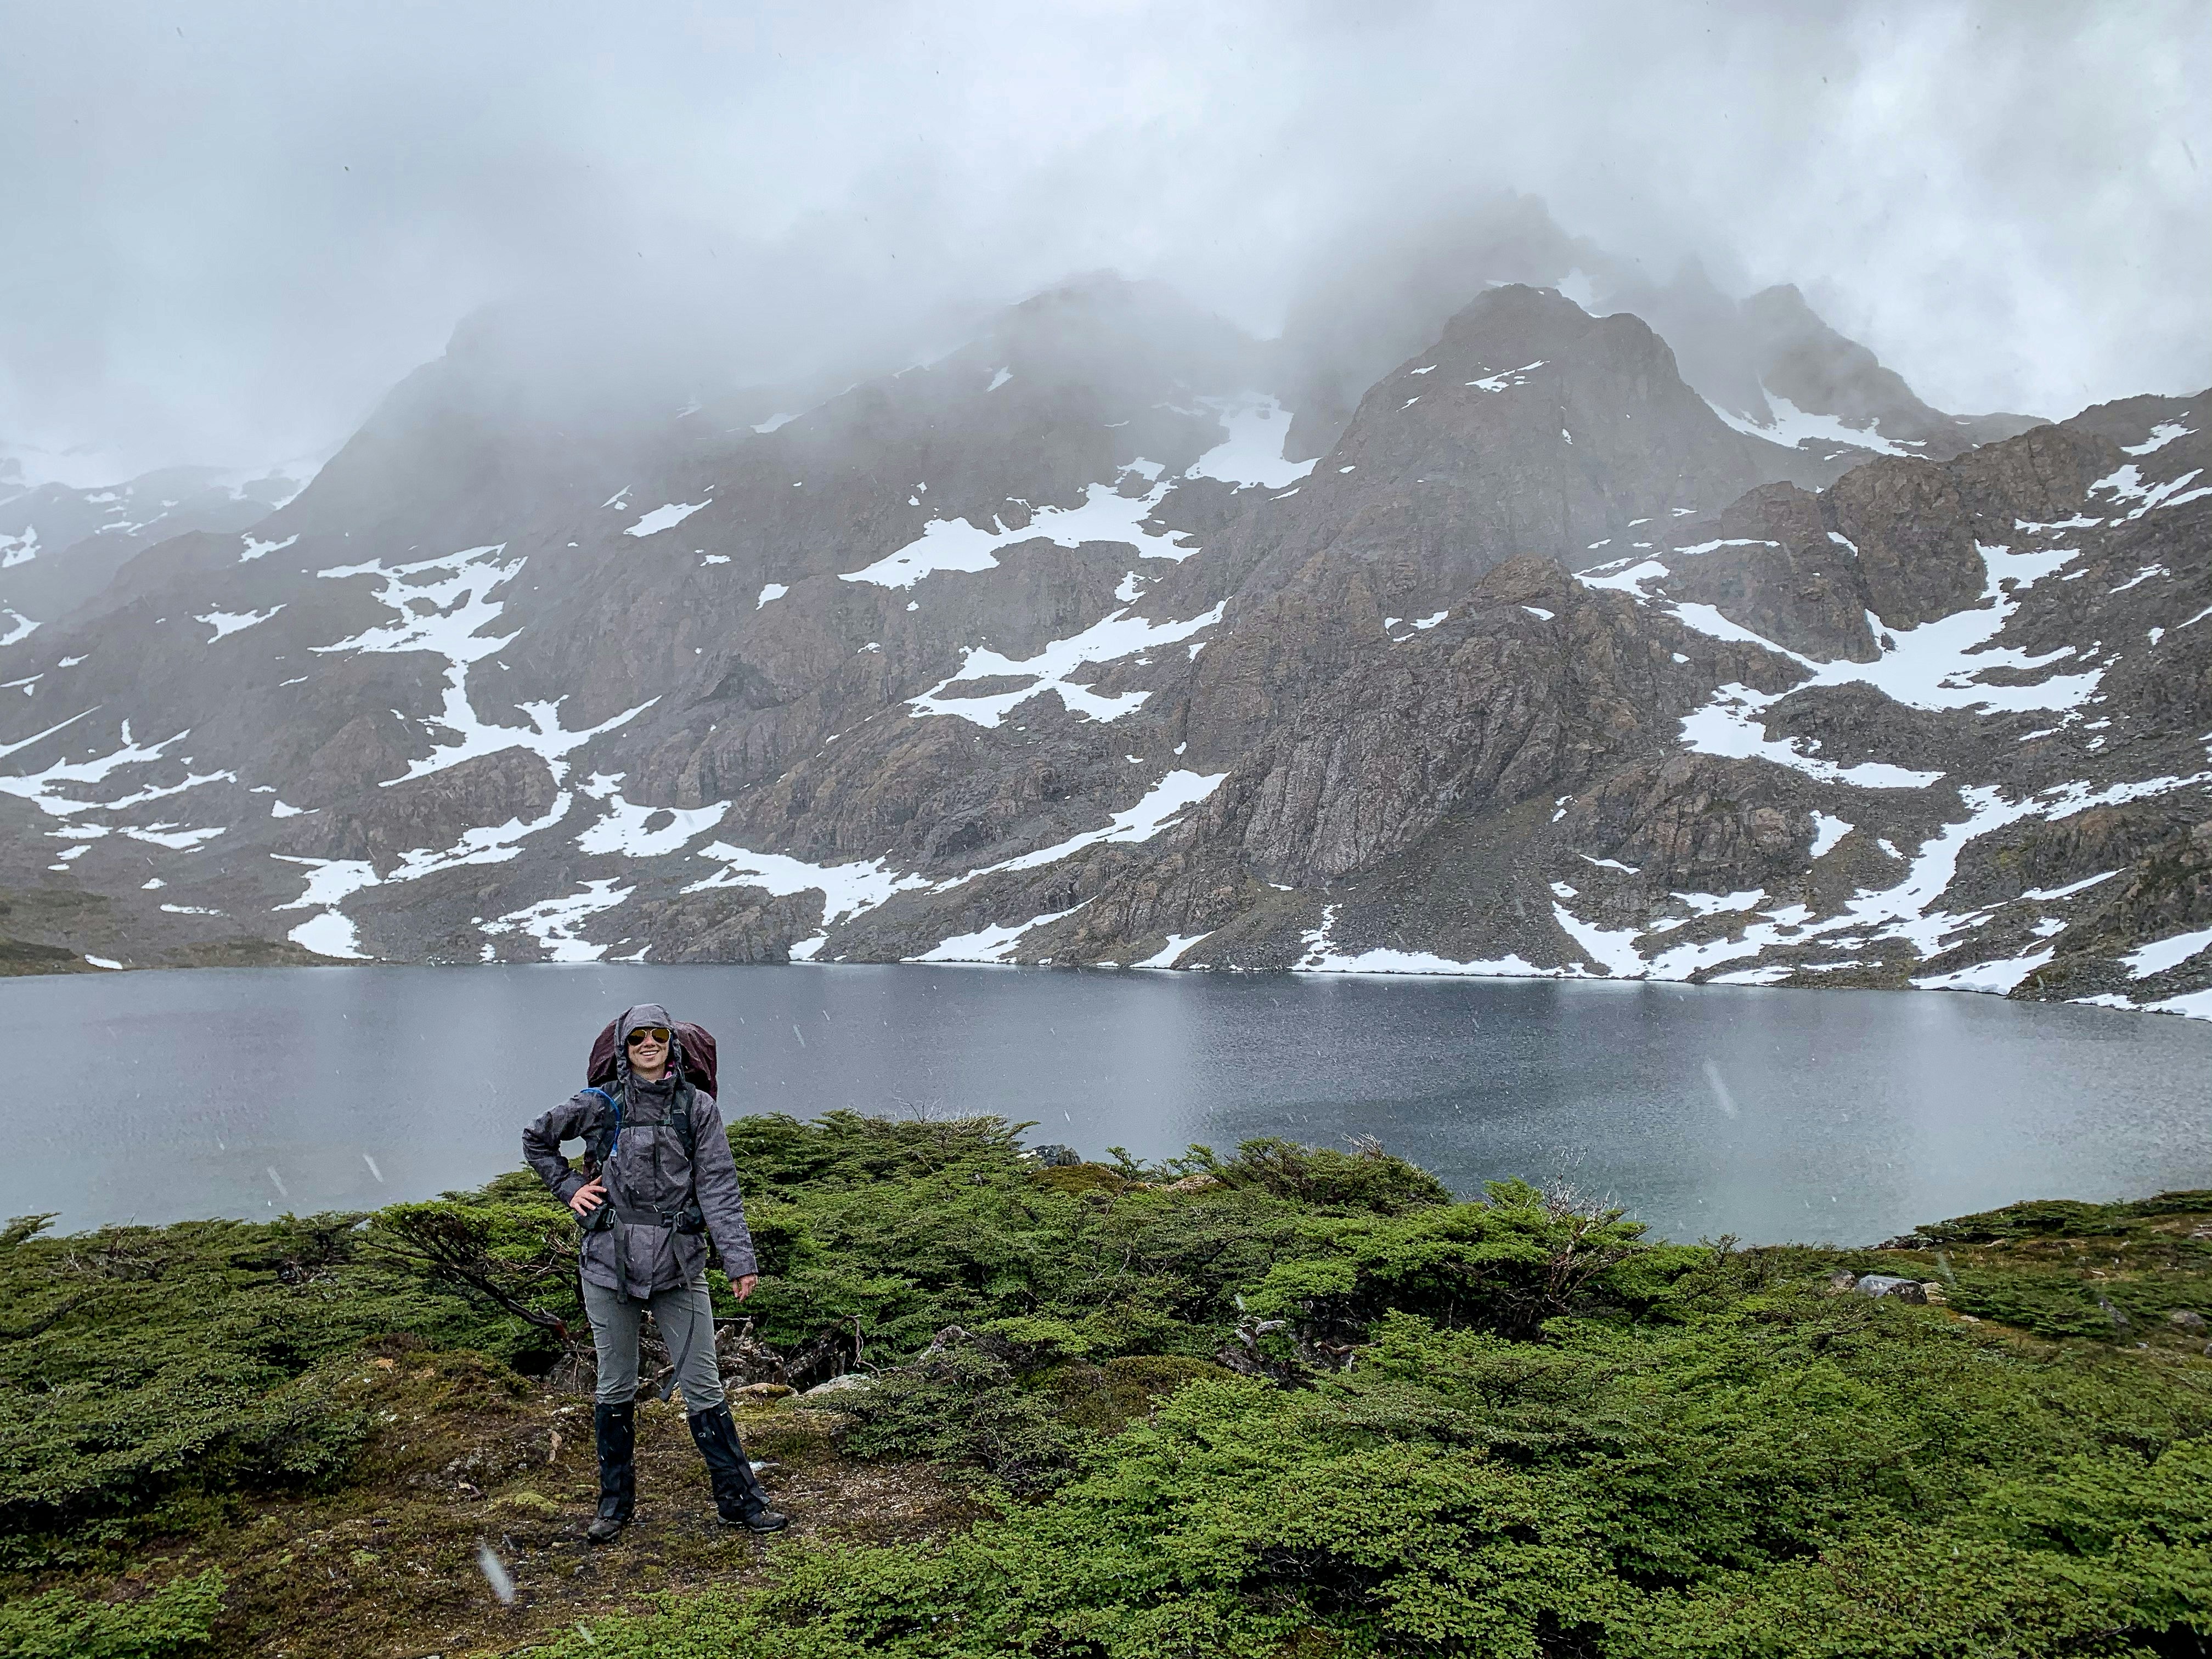 A hiker poses in front of a lake backed by snow-lined mountain slopes; sleet or rain falls